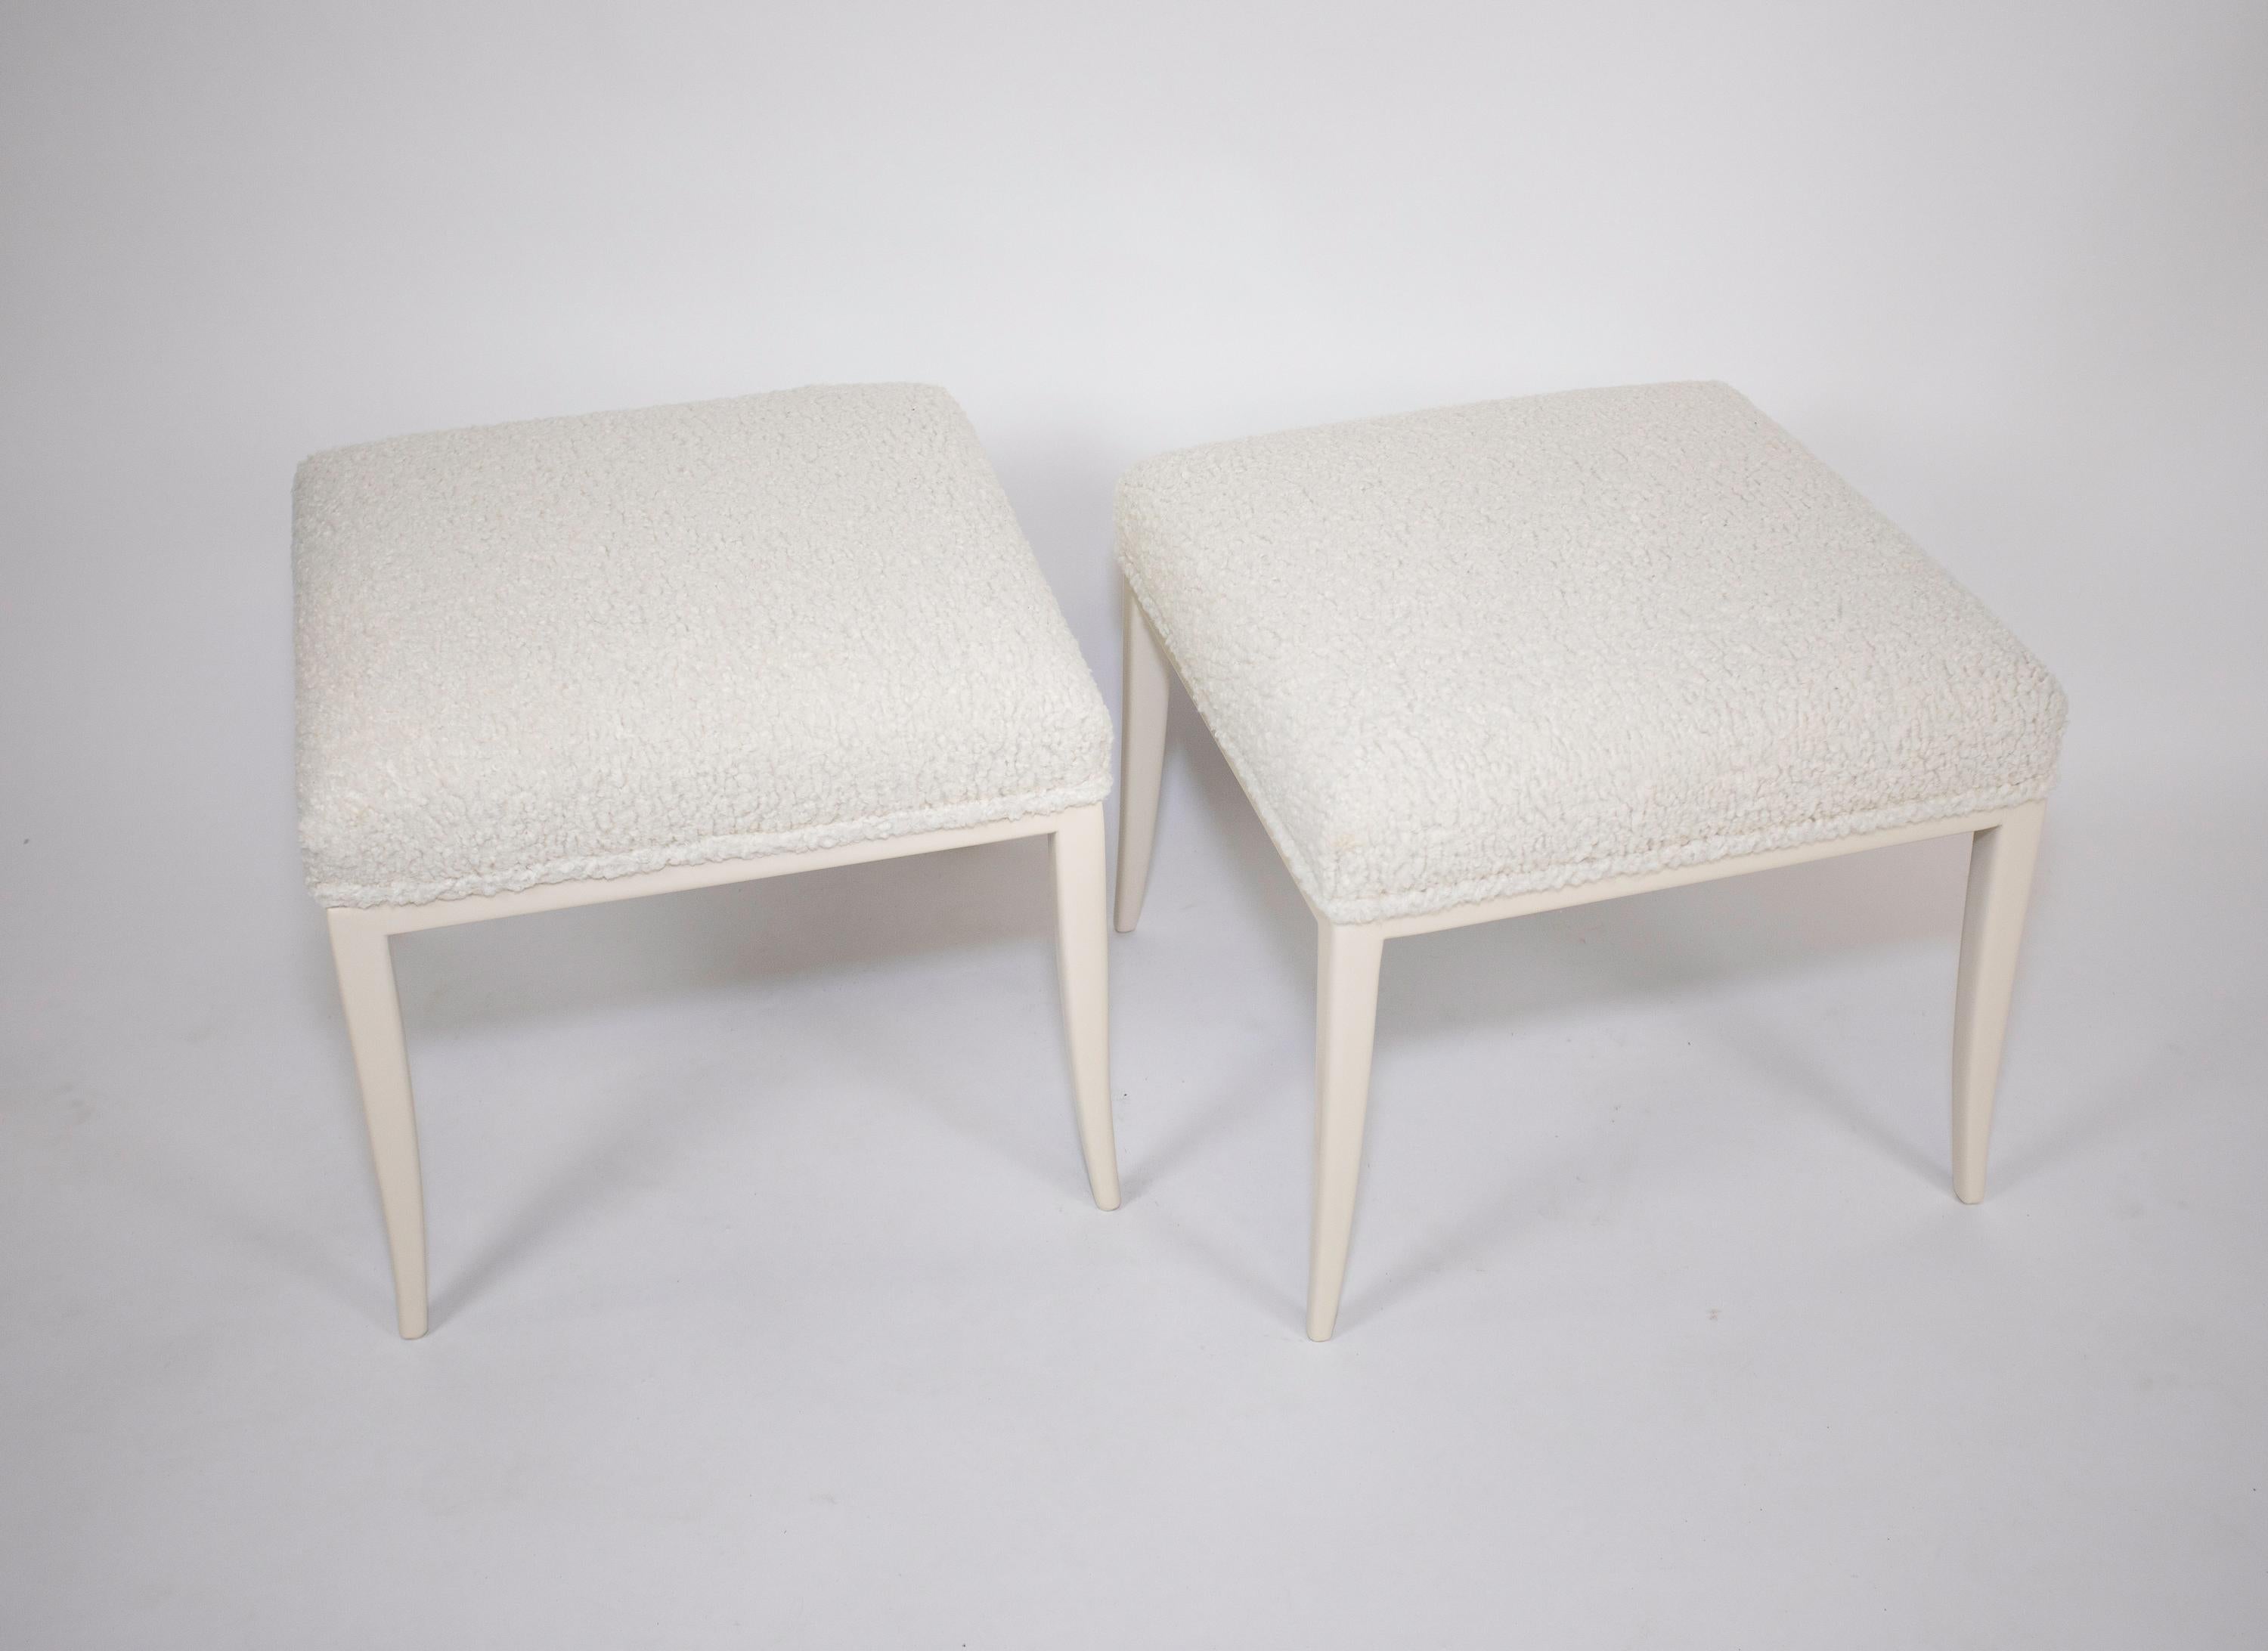 A matched pair of Parzinger Originals stools.
Re-upholstered in Boucle Fabric.
Re-Lacquered in their original color.
Diminutive and elegant.